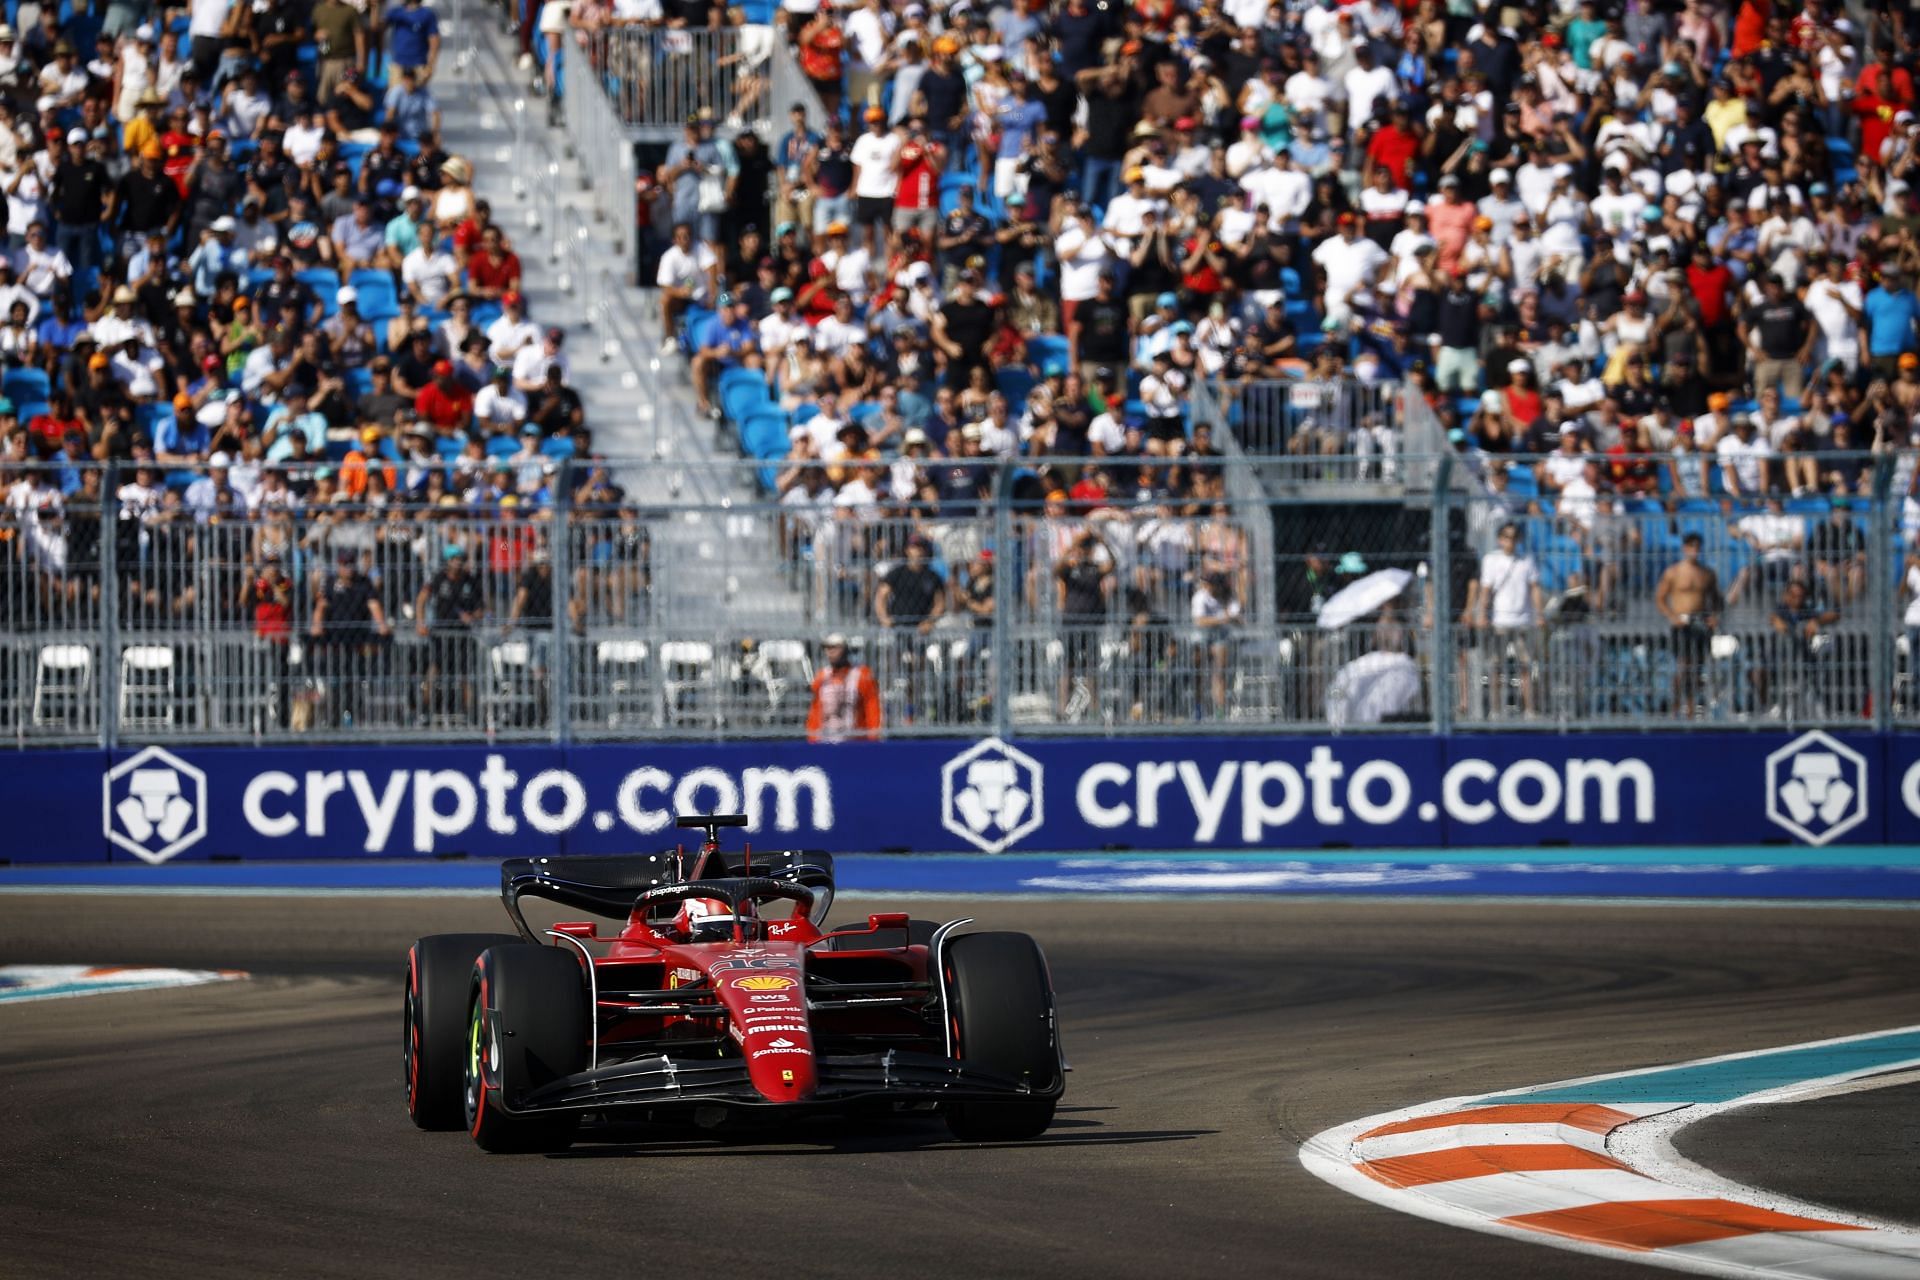 Ferrari driver Charles Leclerc in action during ualifying for the 2022 F1 Miami GP. (Photo by Chris Graythen/Getty Images)